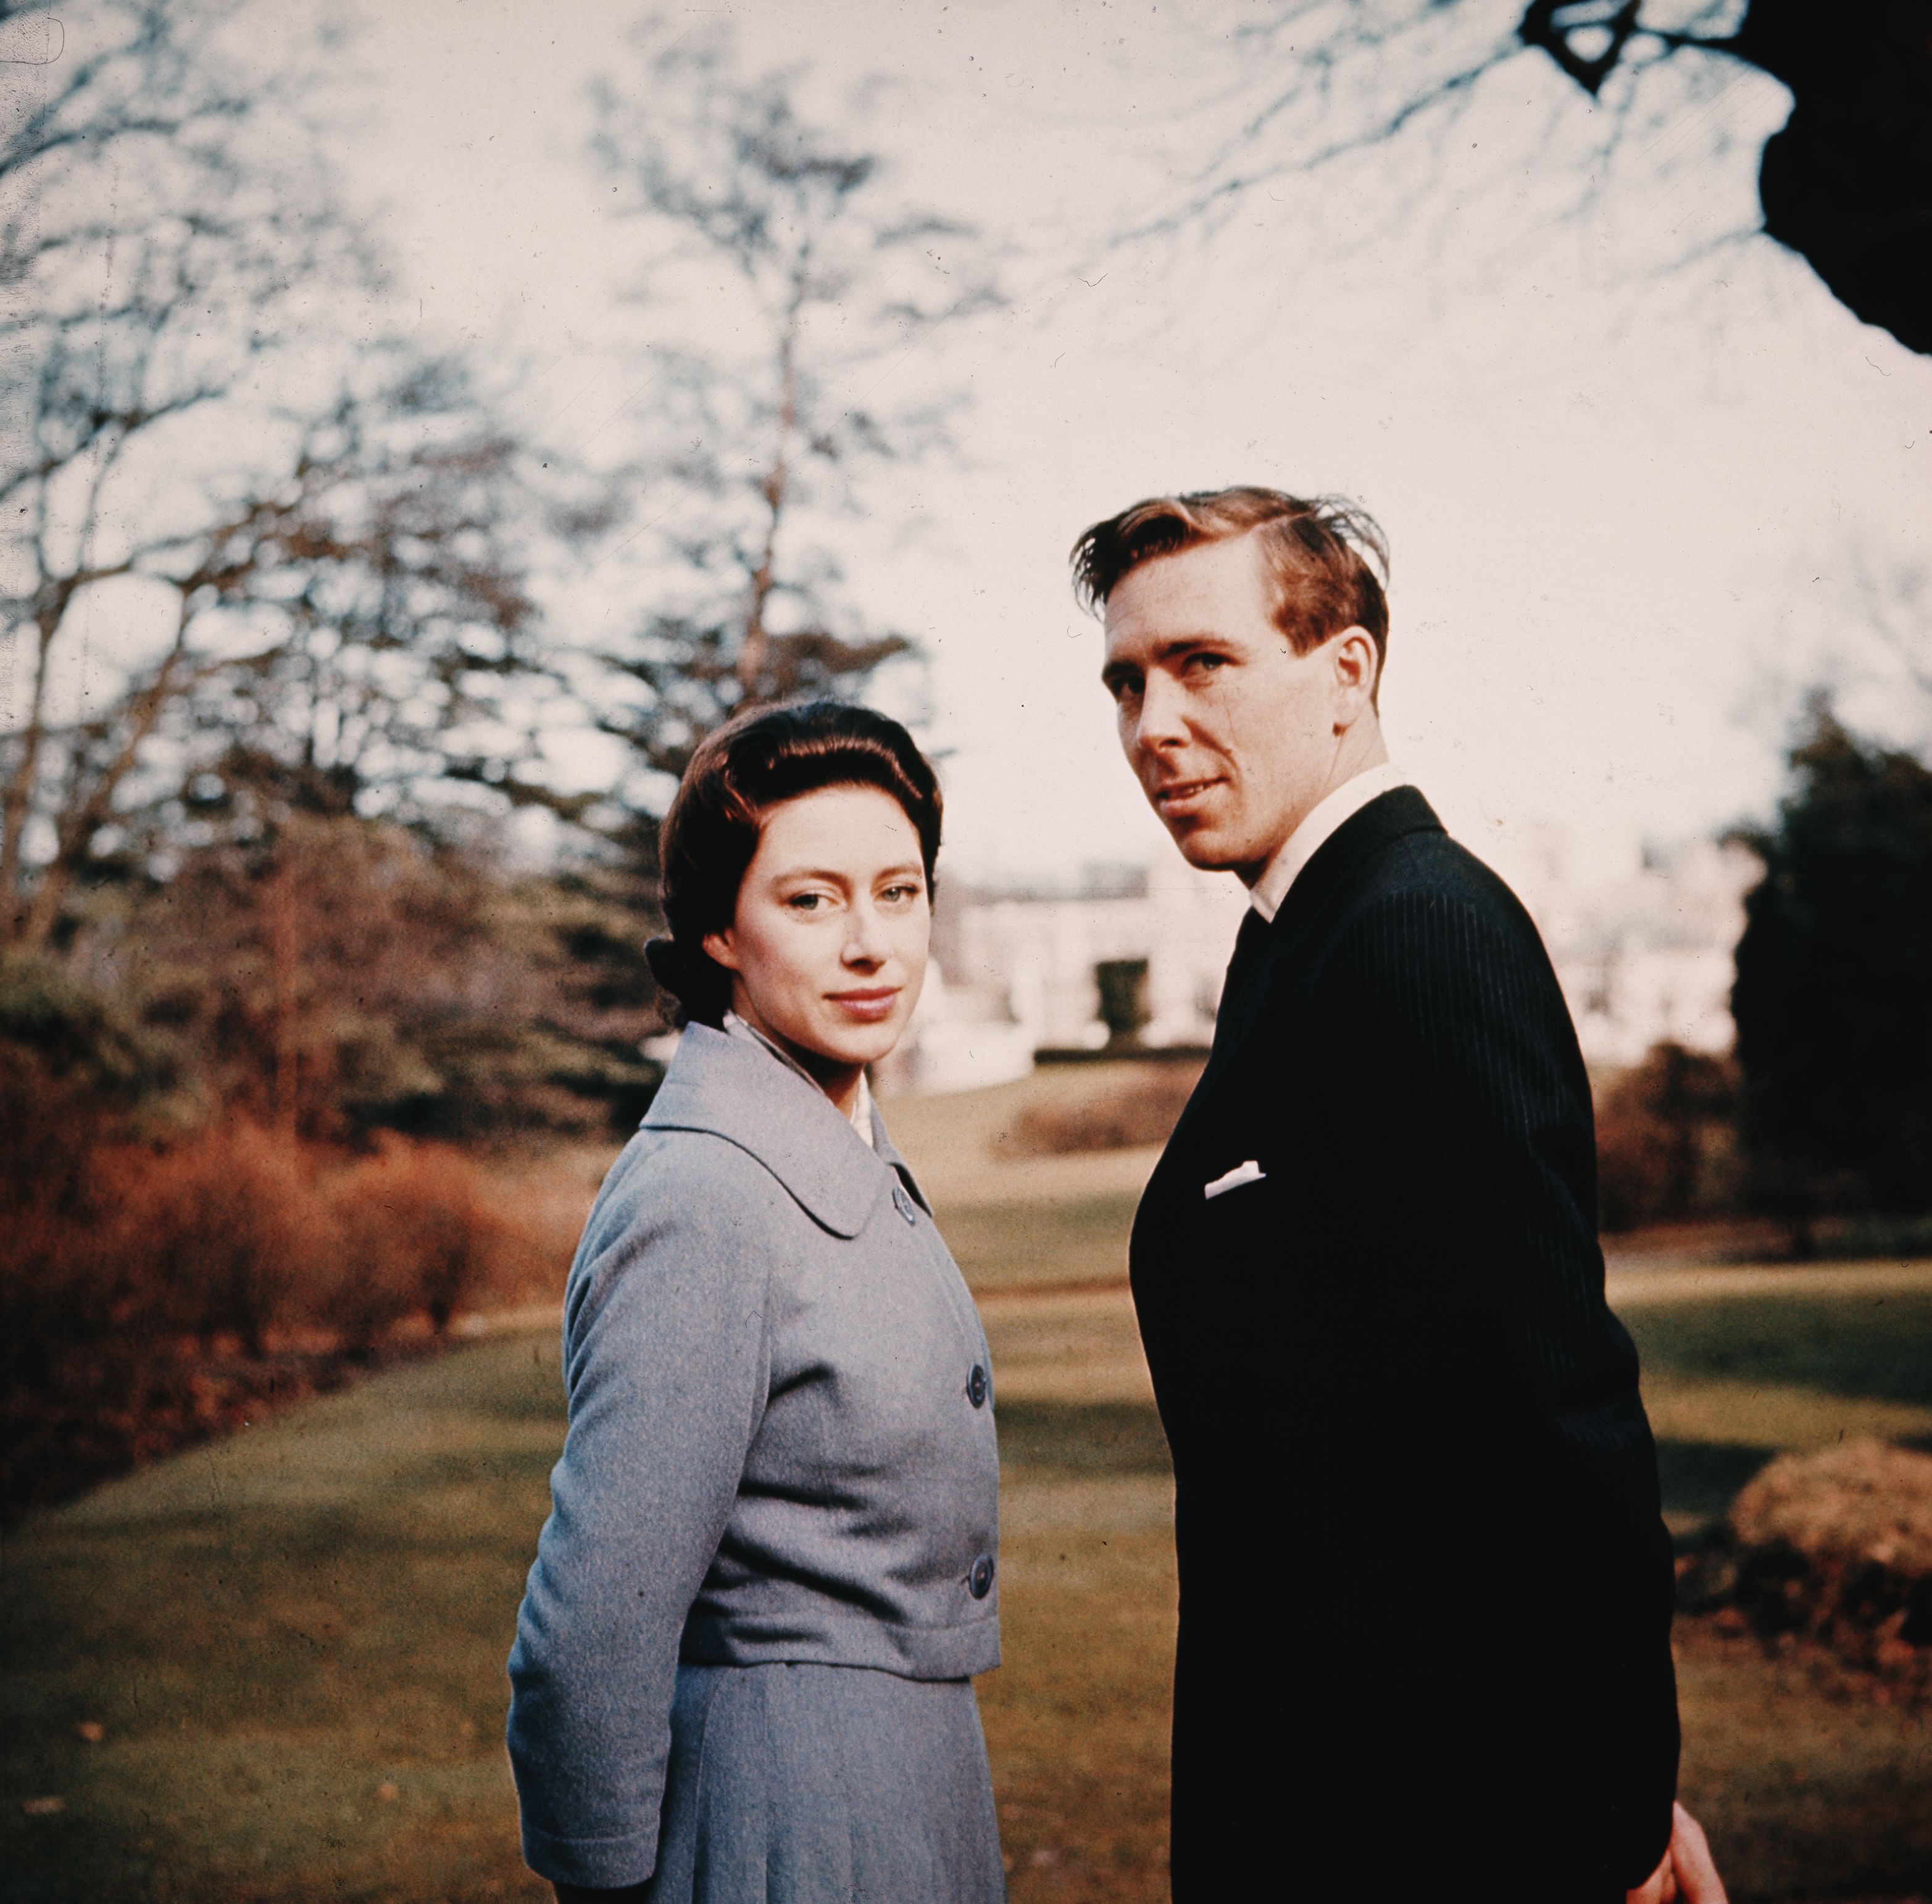 Princess Margaret and Antony Armstrong-Jones in the grounds of Royal Lodge after they announced their engagement. | Source: Getty Images